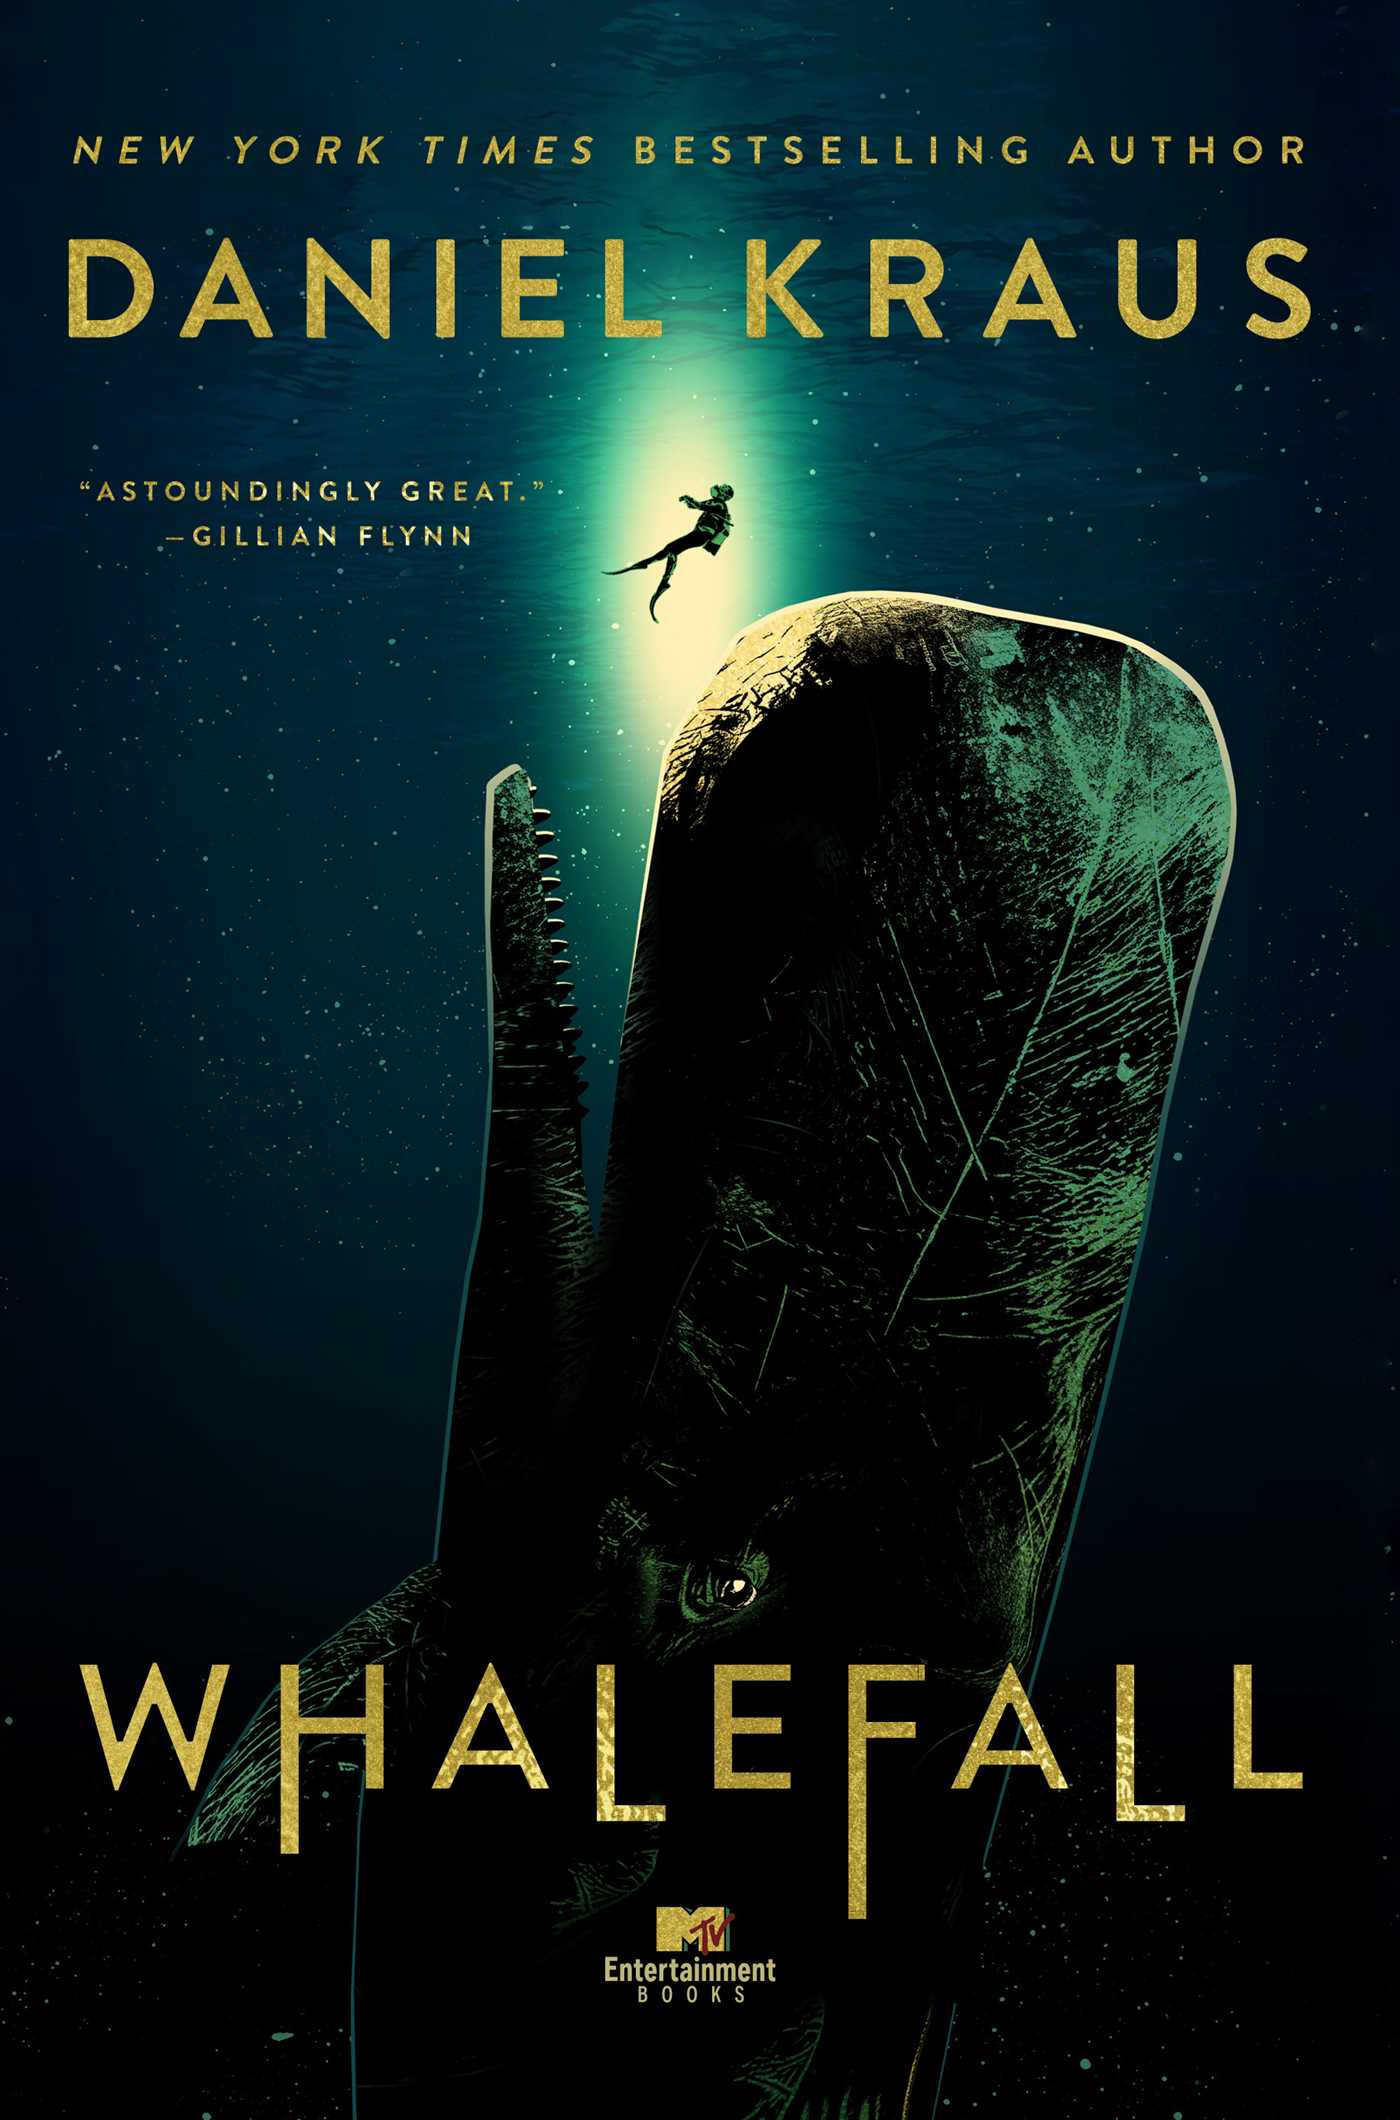 Book Review: Whalefall by Daniel Kraus